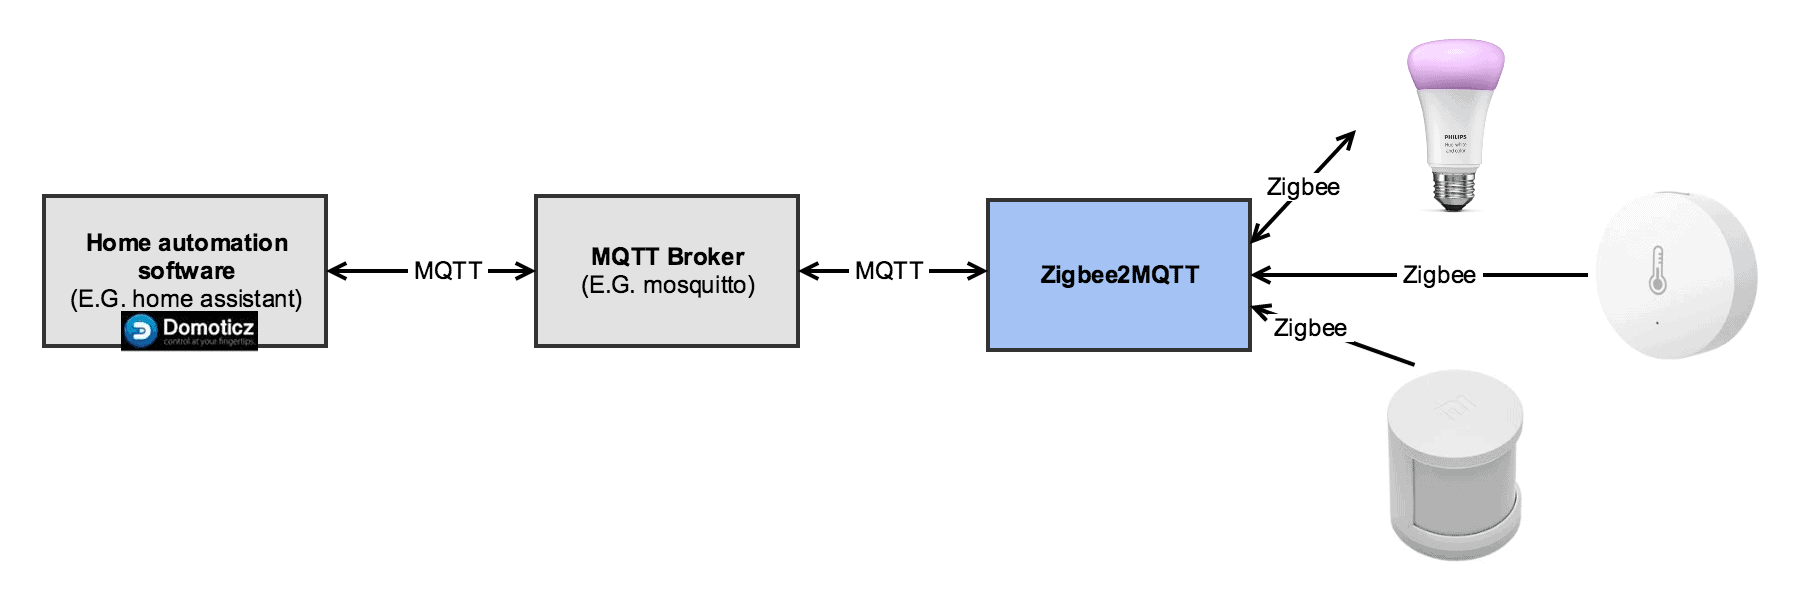 Architecture of the zigbee2mqtt project.
